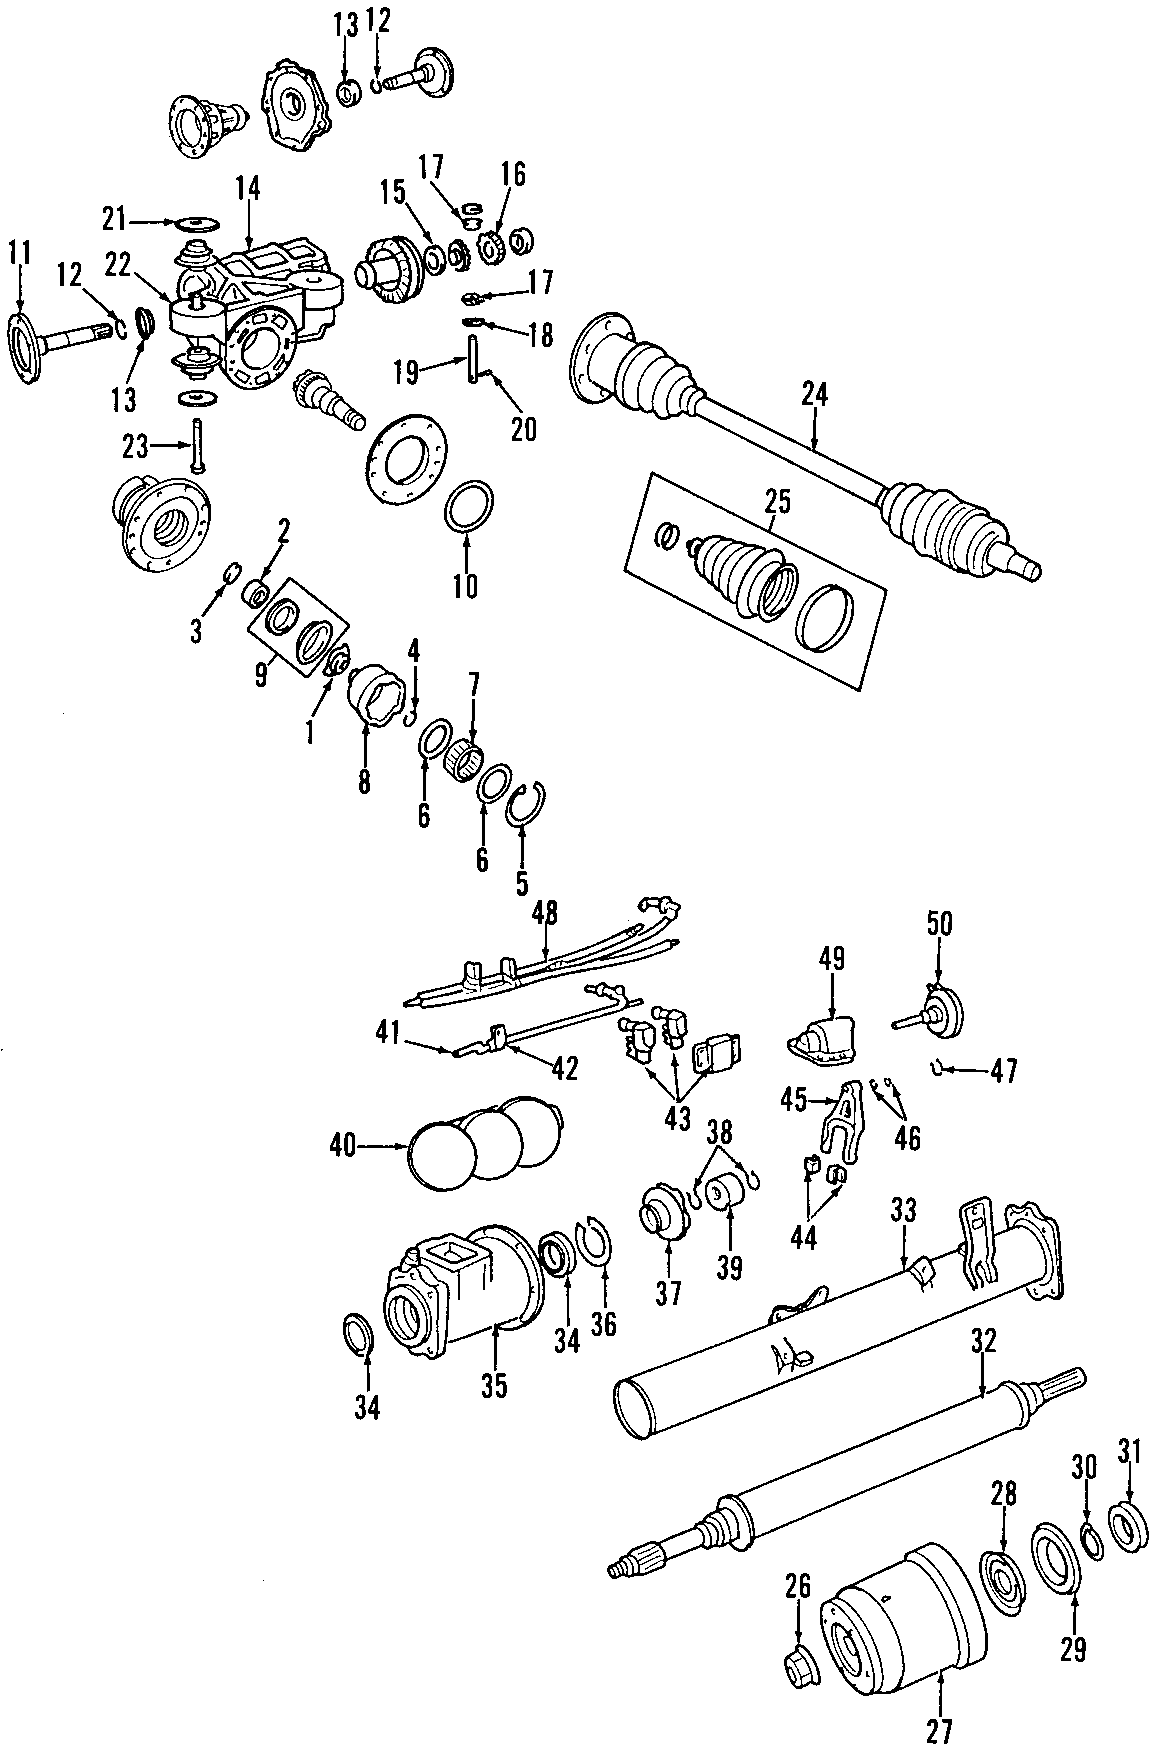 1DRIVE AXLES. REAR AXLE. AXLE SHAFTS & JOINTS. DIFFERENTIAL. PROPELLER SHAFT.https://images.simplepart.com/images/parts/motor/fullsize/T040085.png